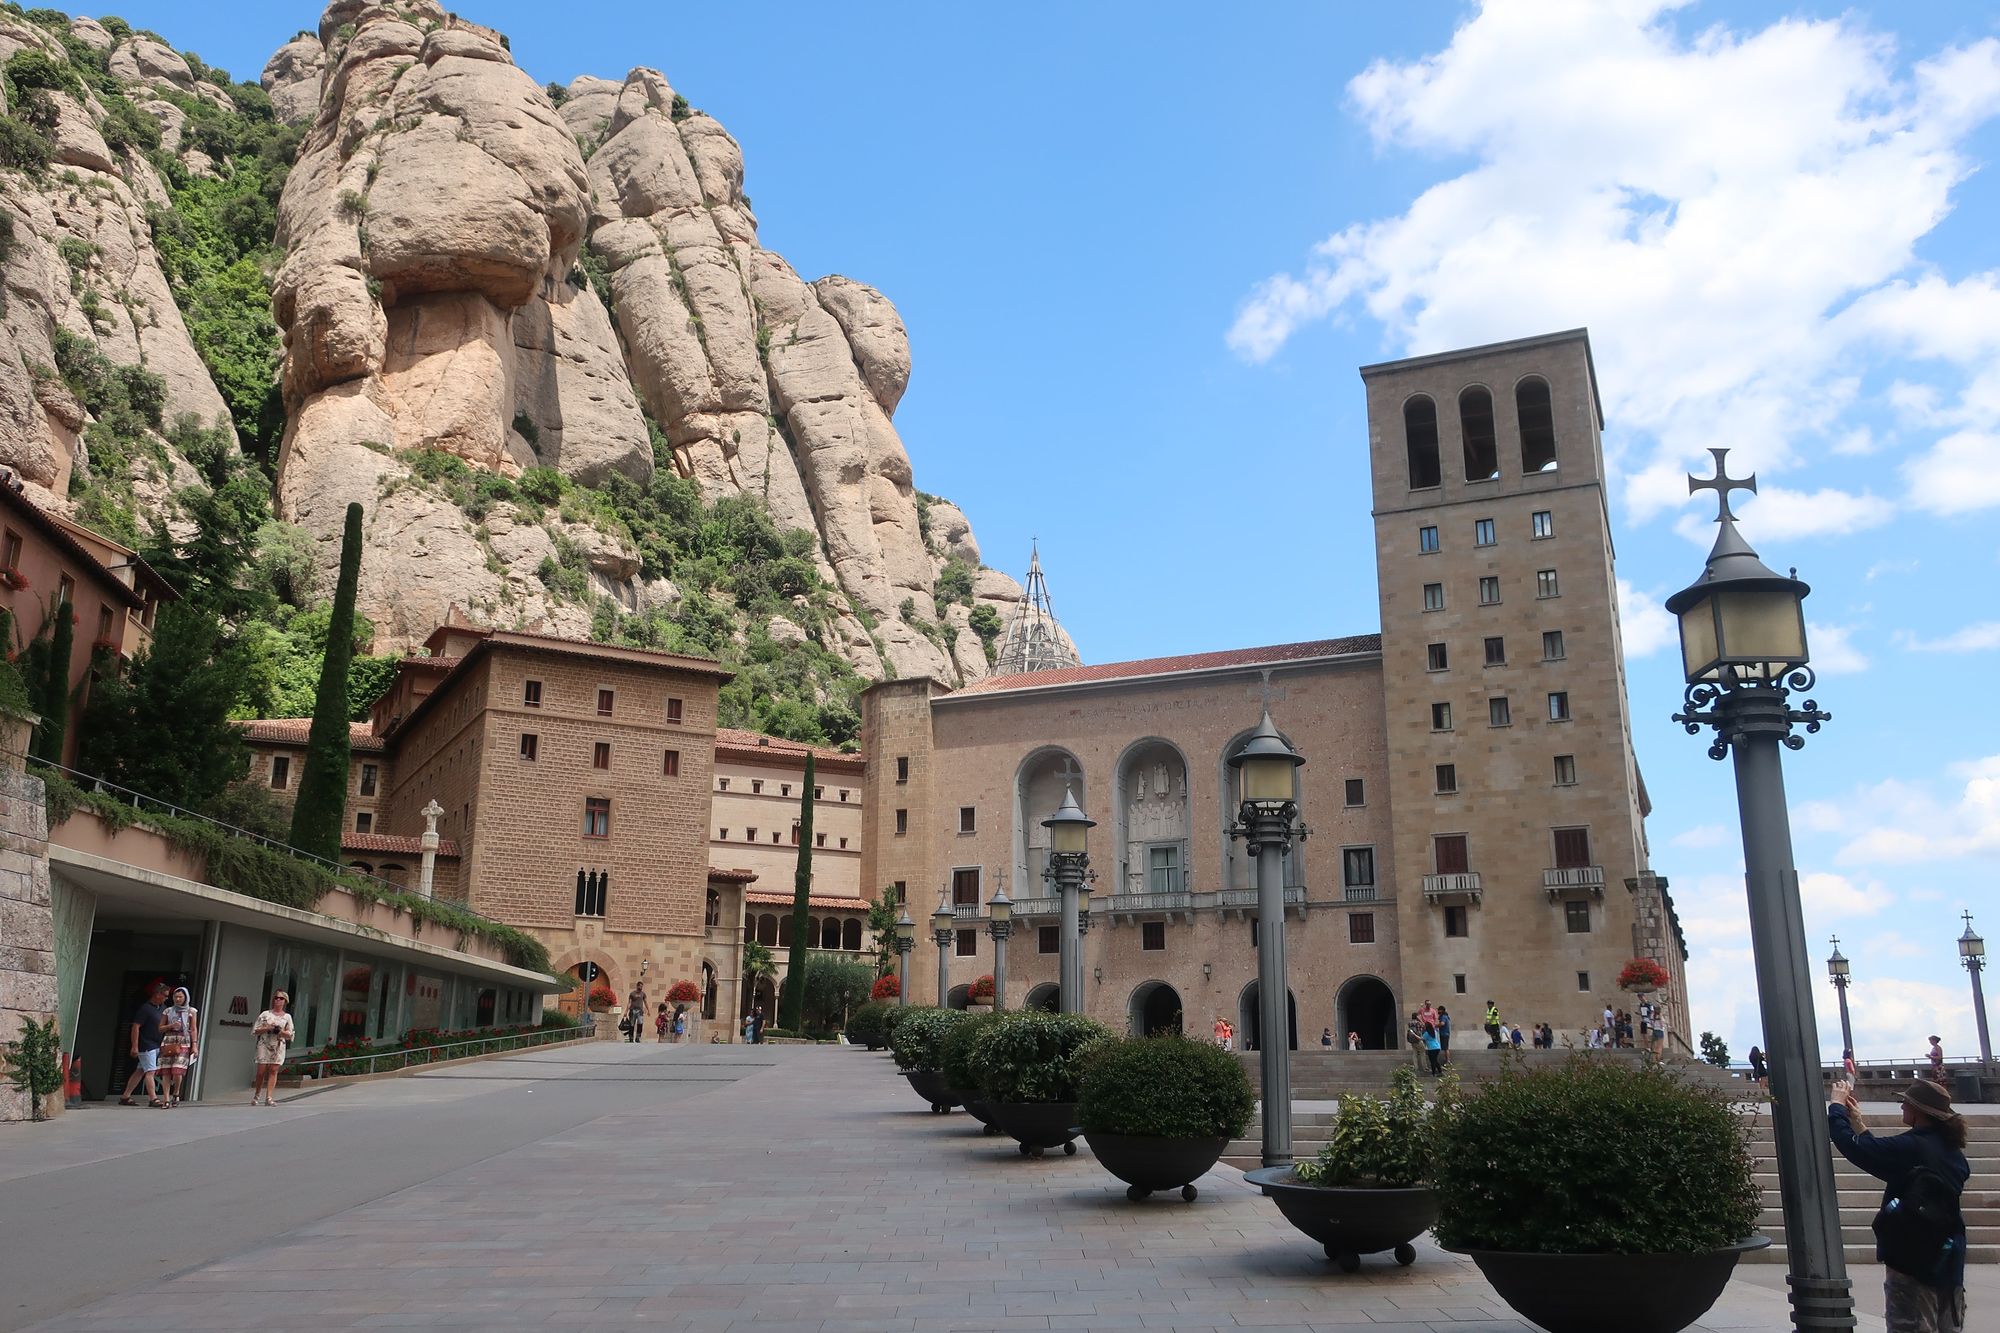 A mountainous cliffside and an old building in Montserrat